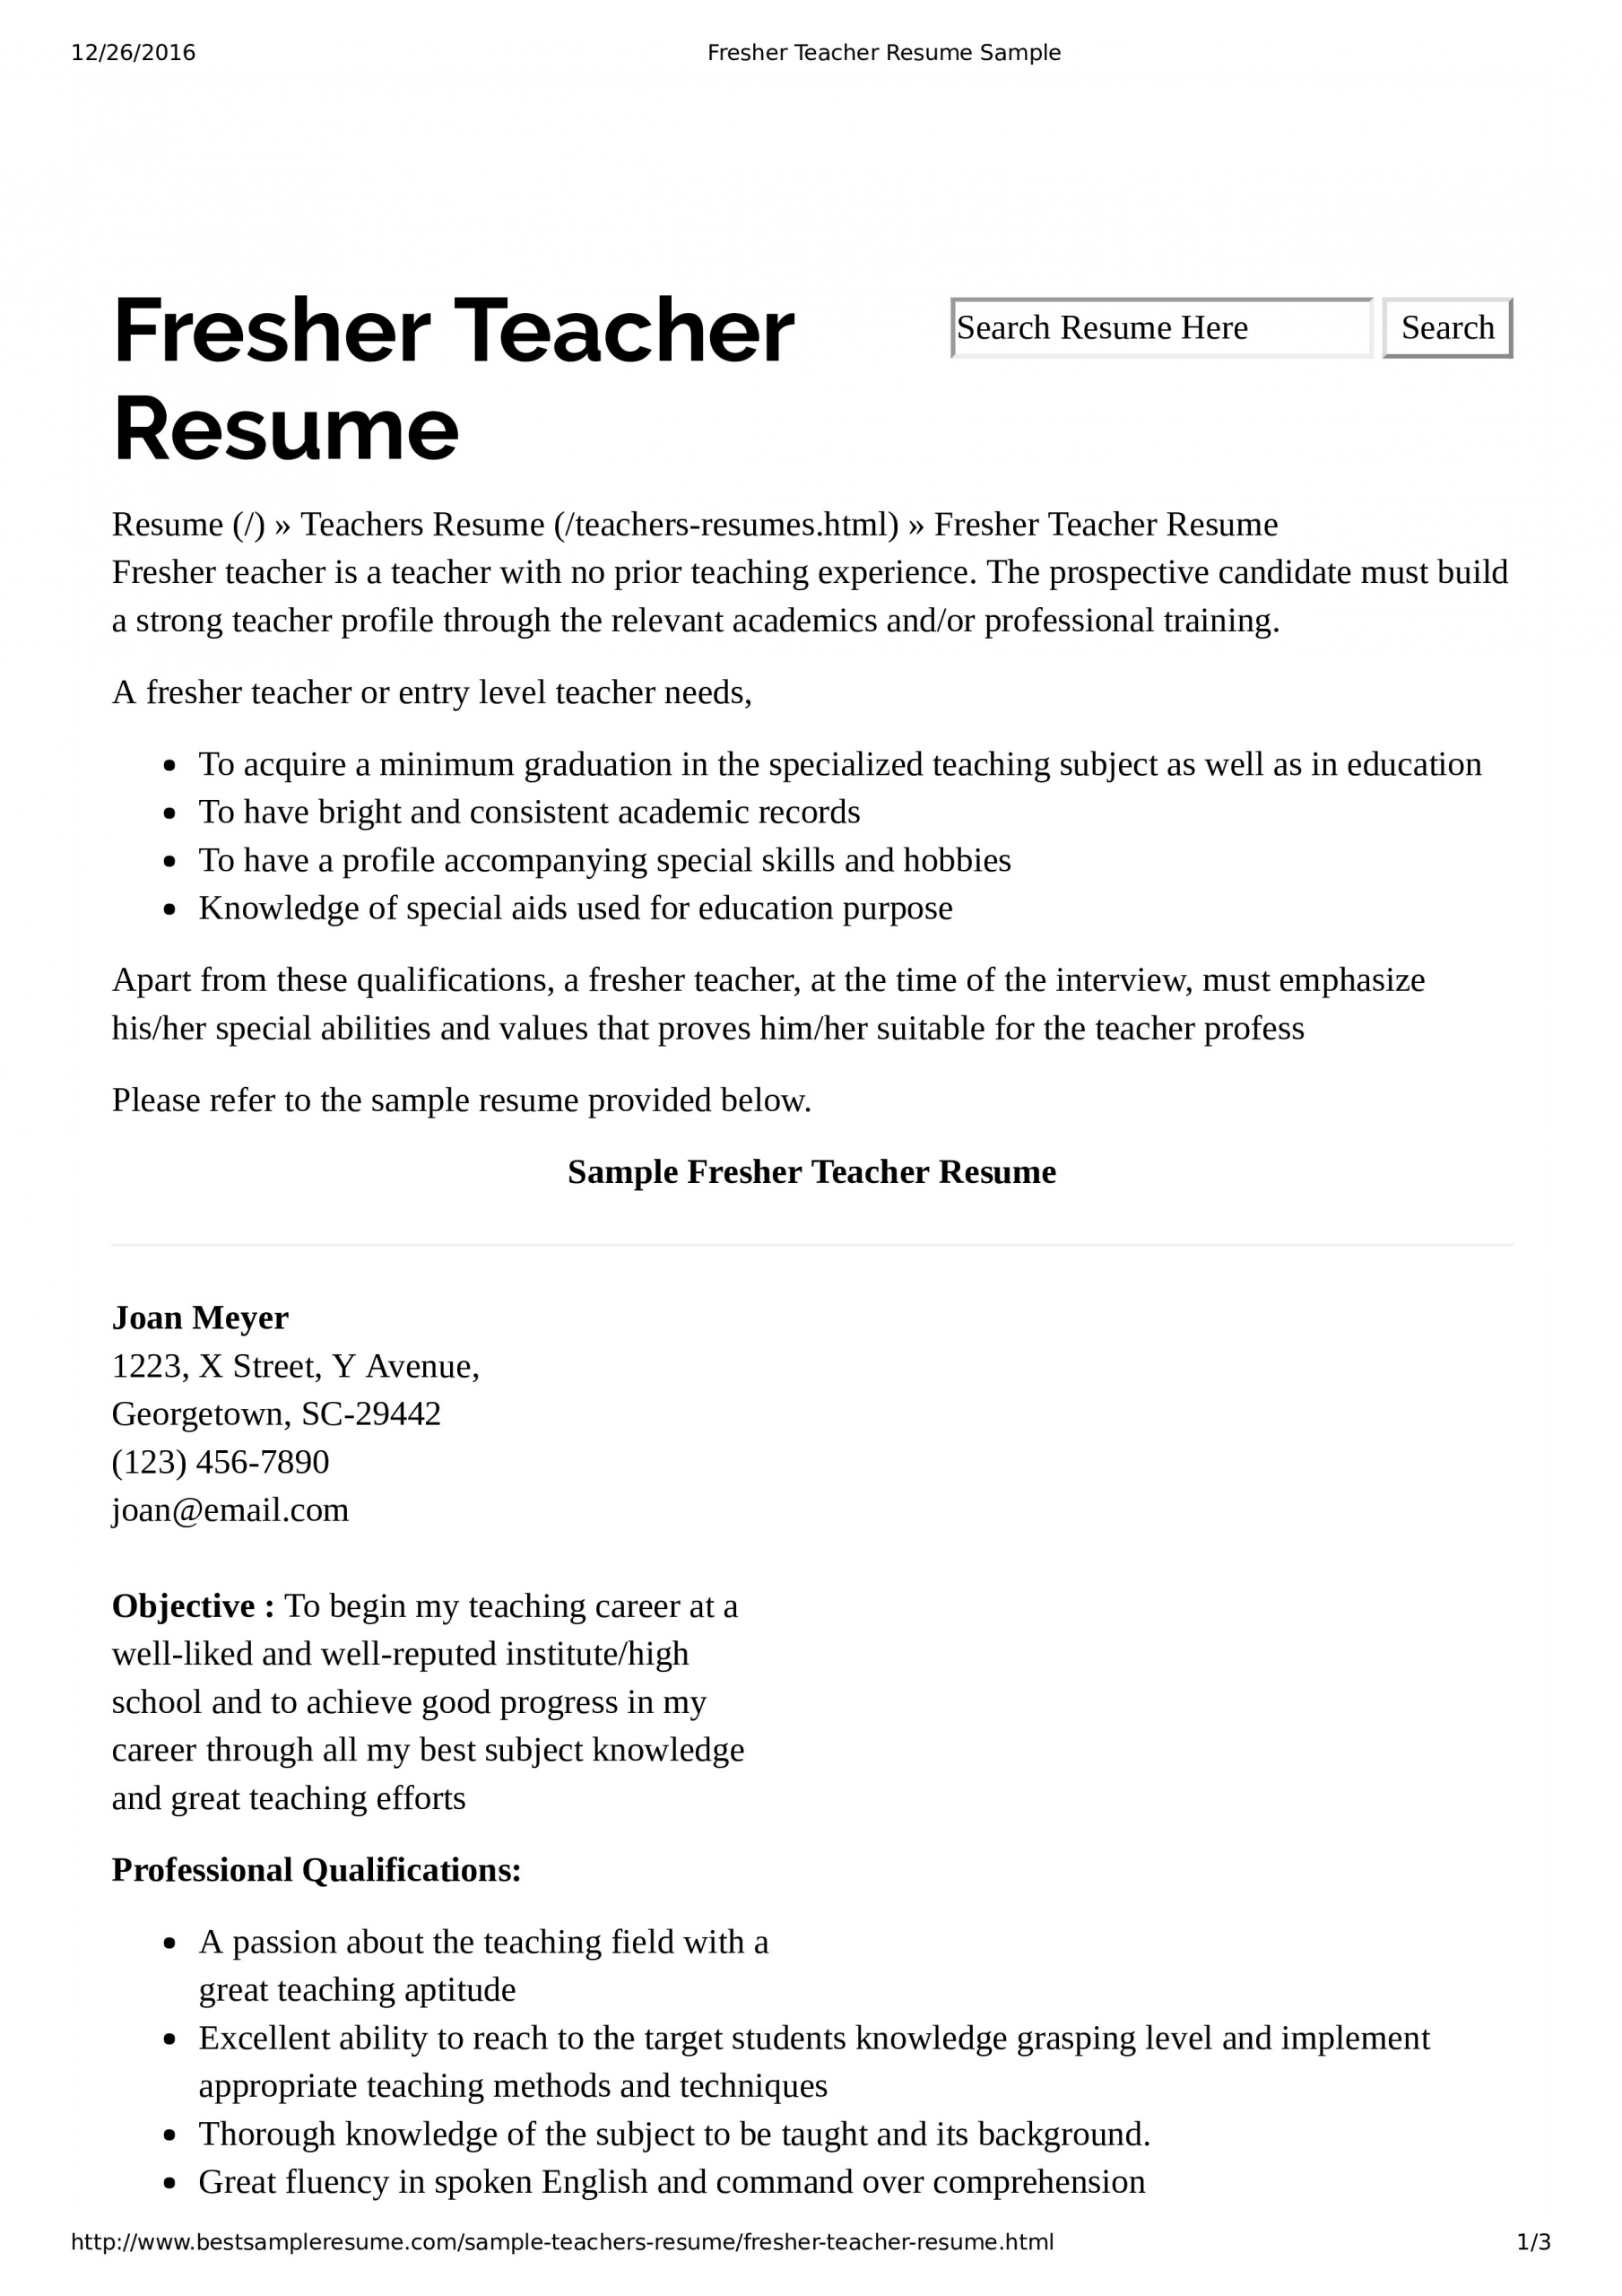 Basic Sample Resume for No Experience Preschool Teacher Resume with No Experience